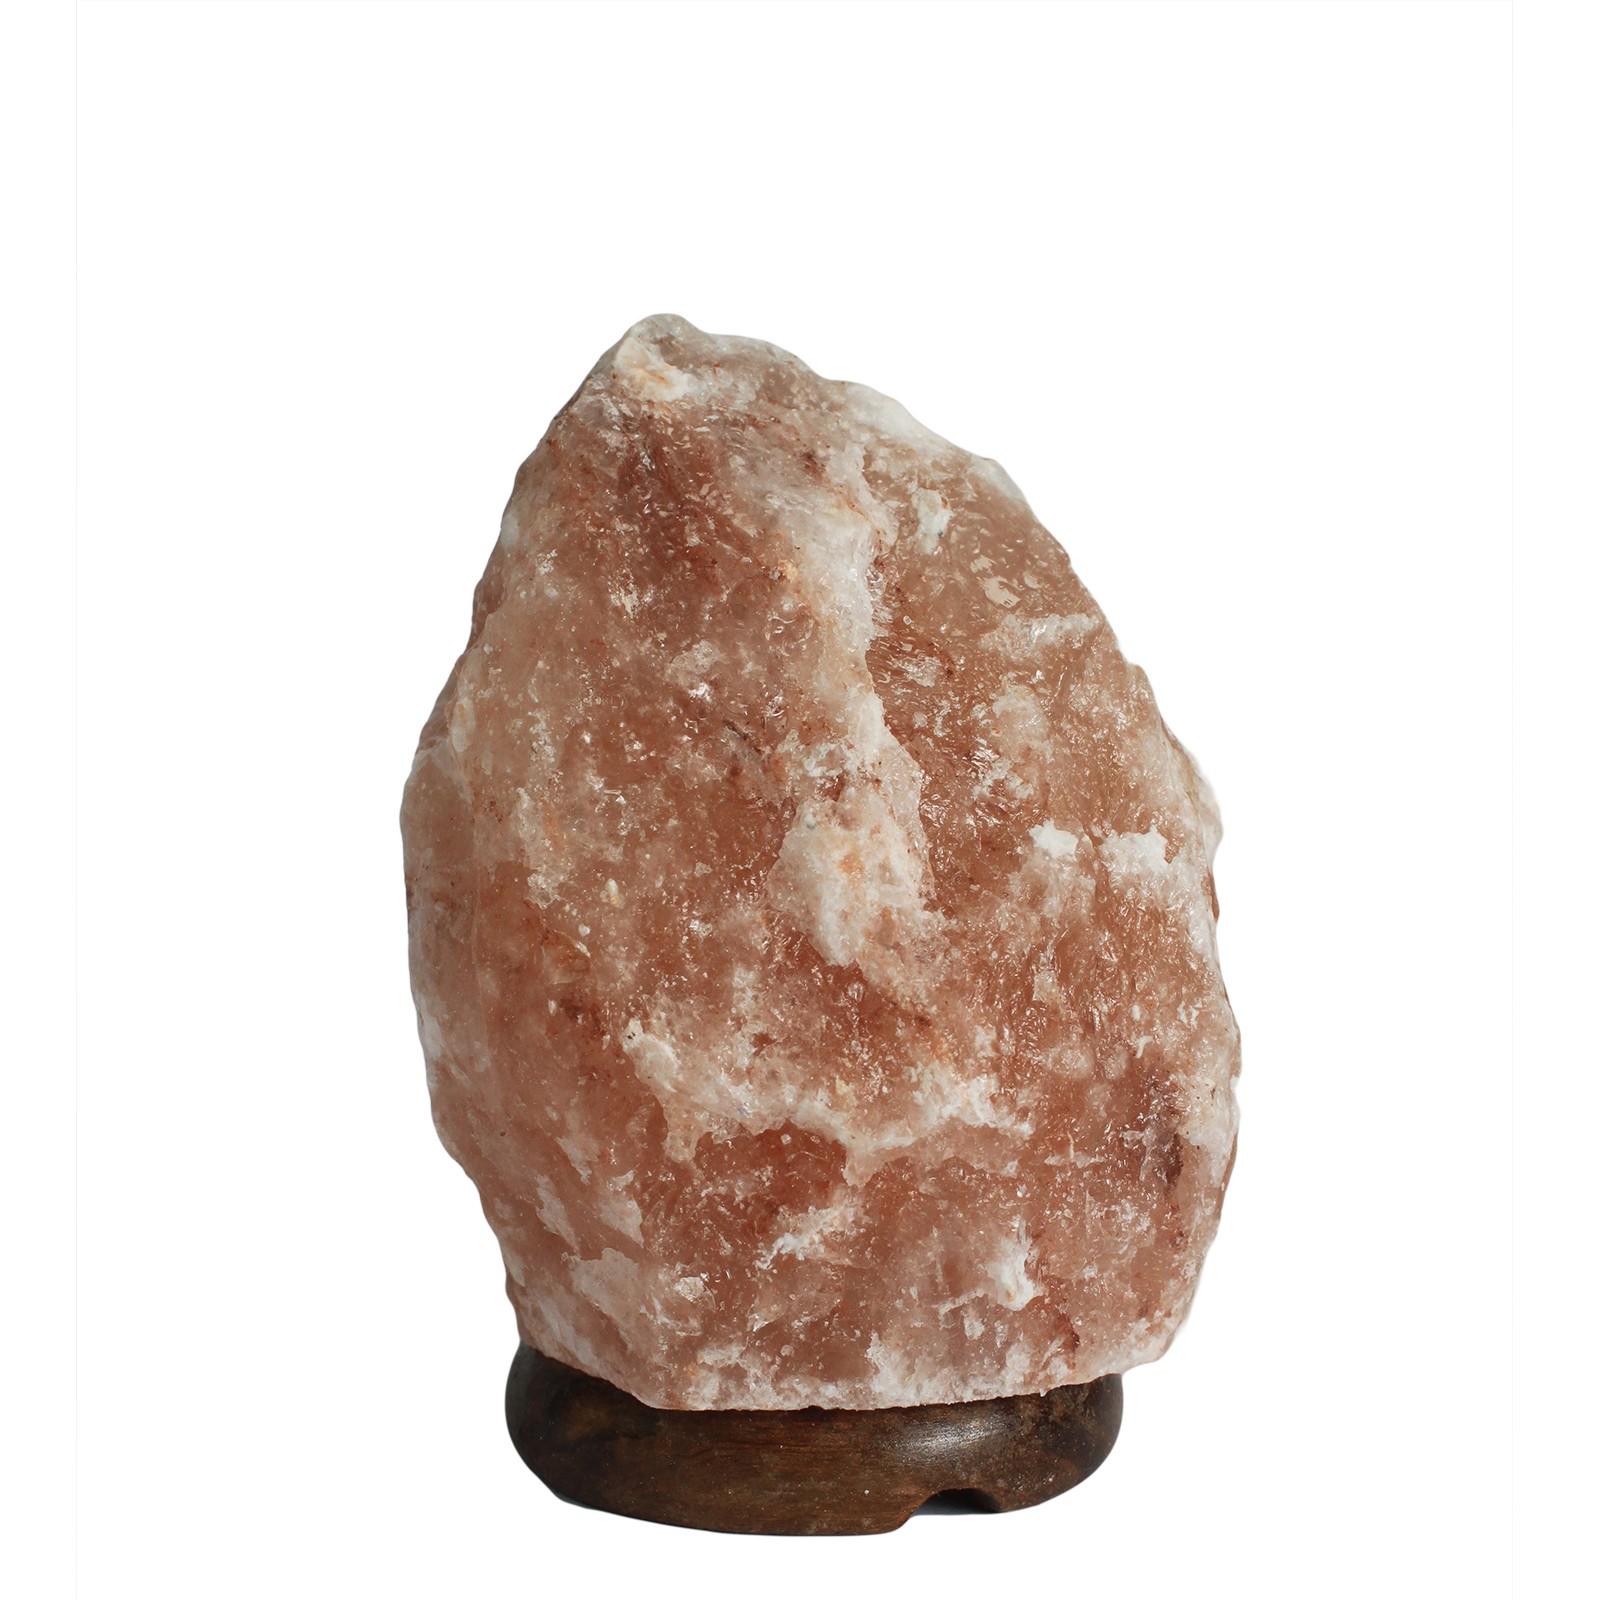 Quality Himalayan Salt Lamp with Wooden Base - 1.5 to 2 kg